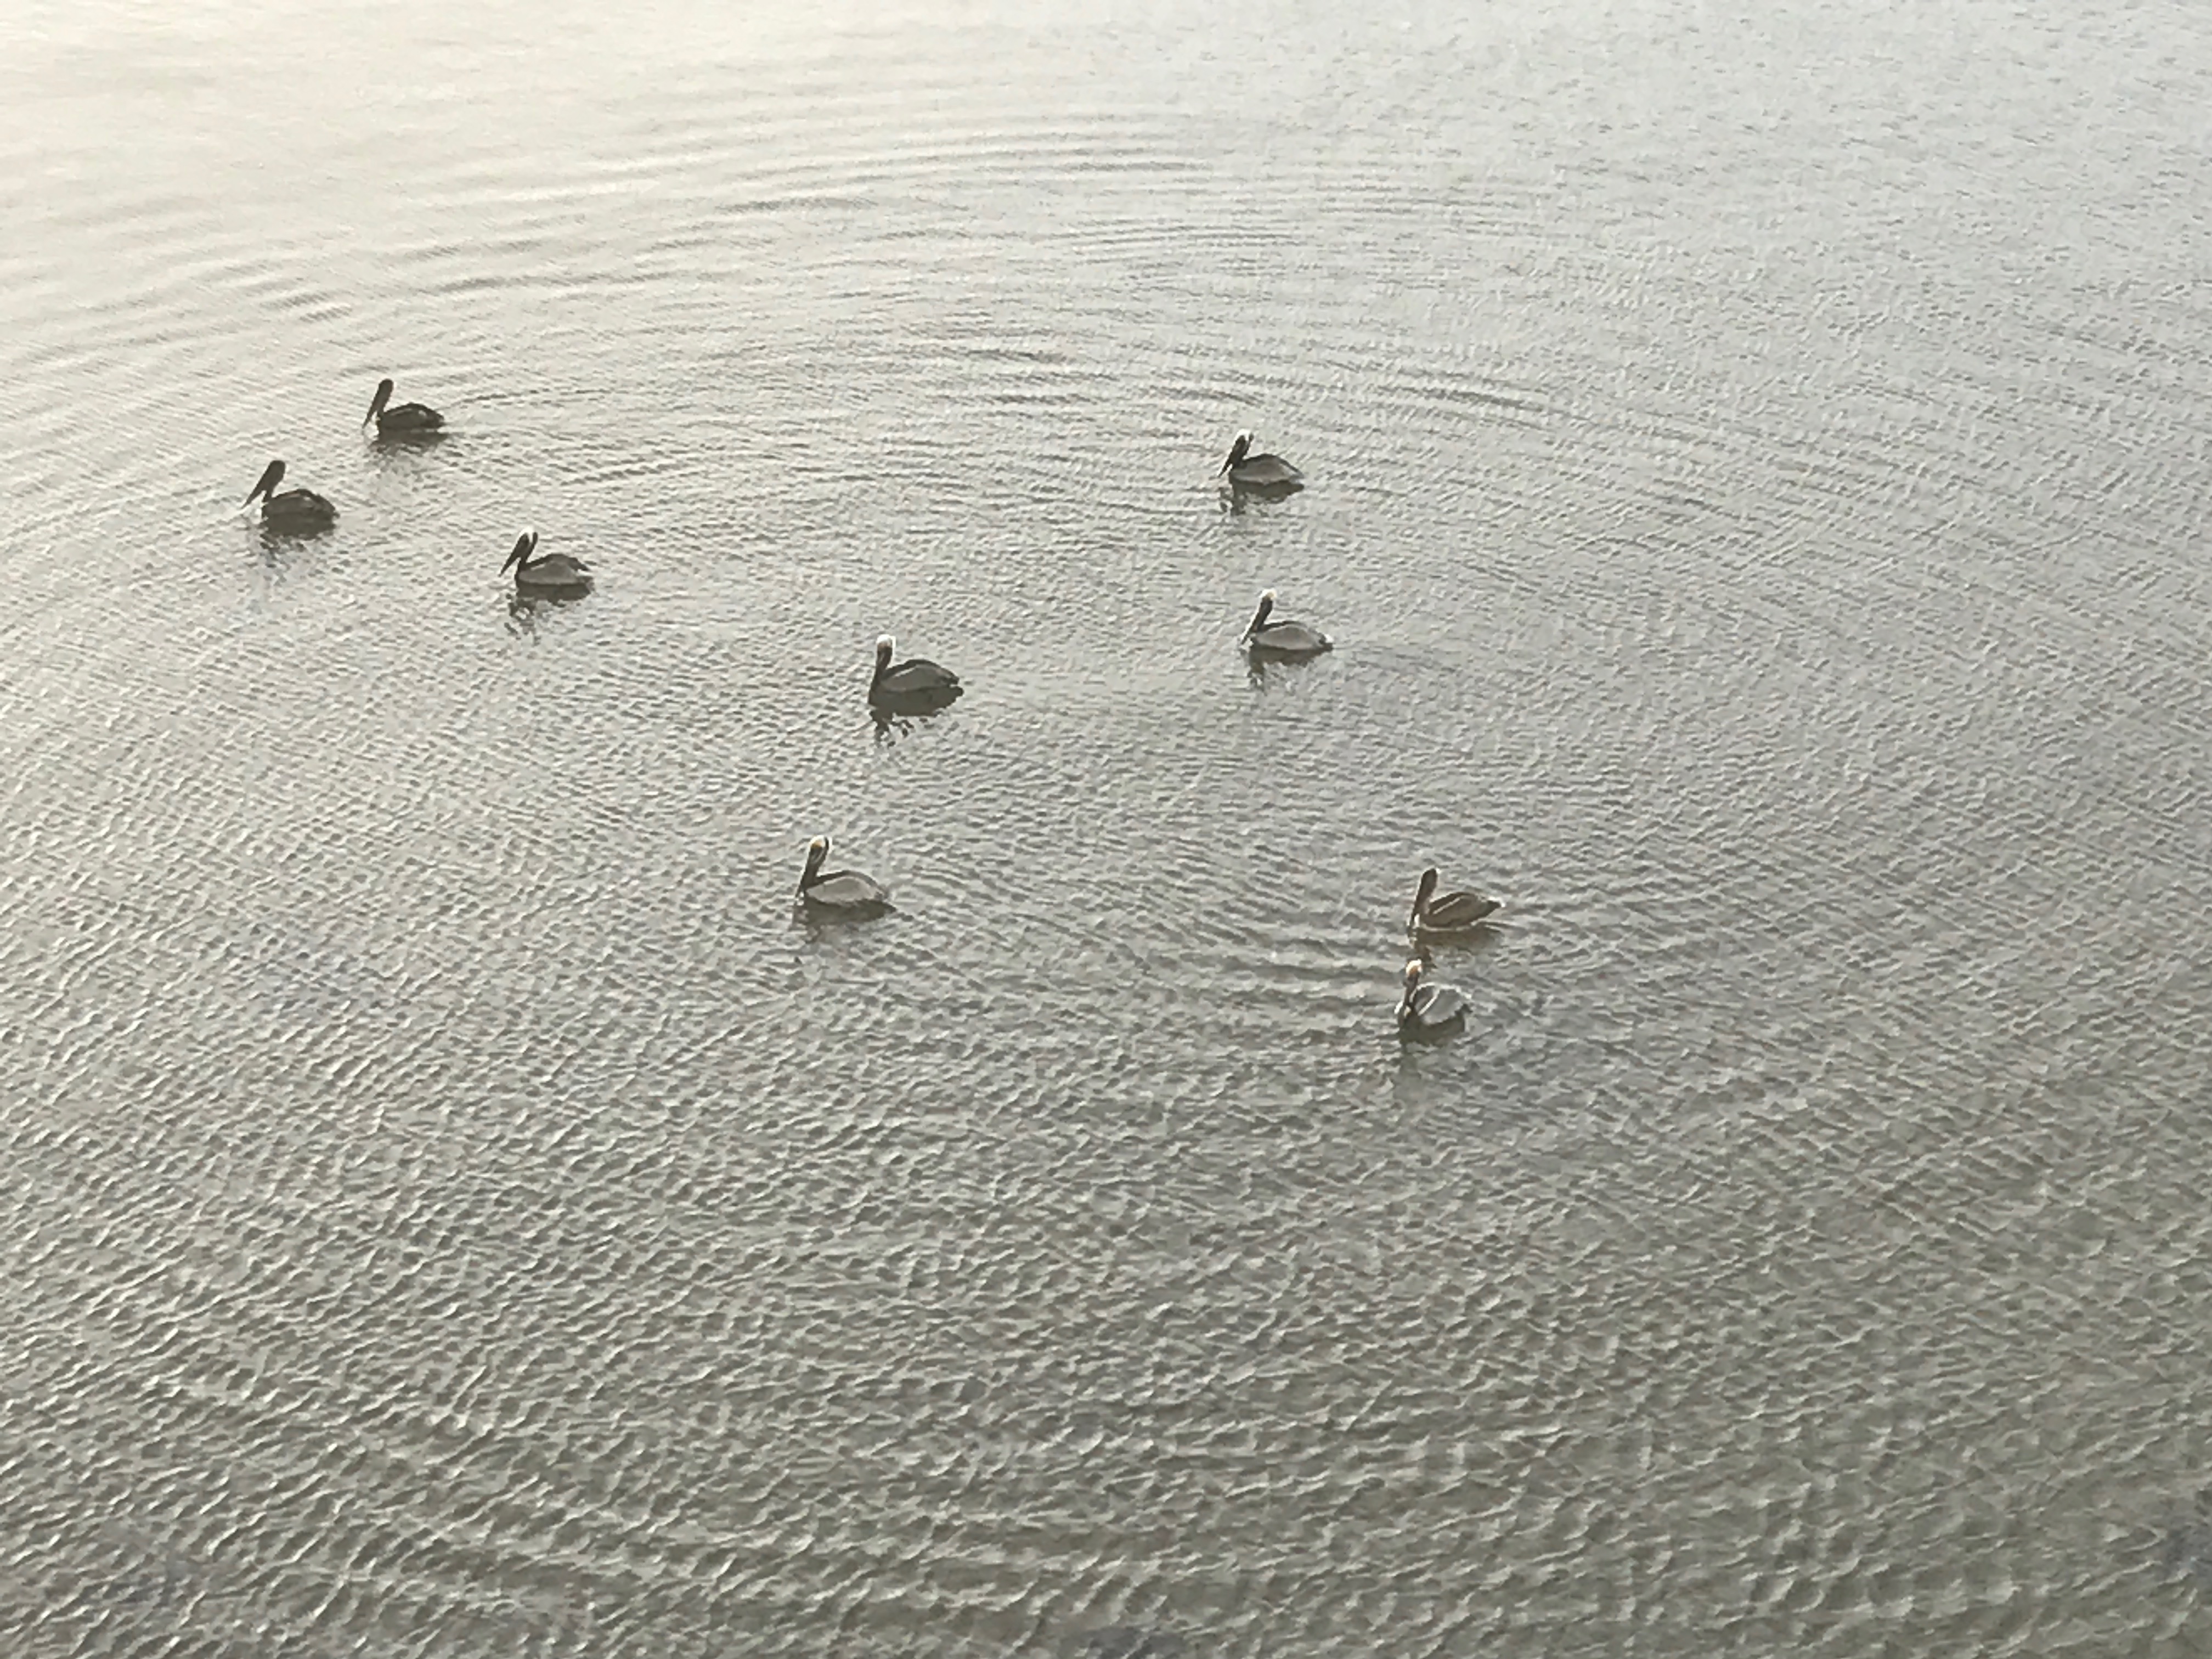 Pelicans off the balcony taken by 480 resident MS (iPhone 7)